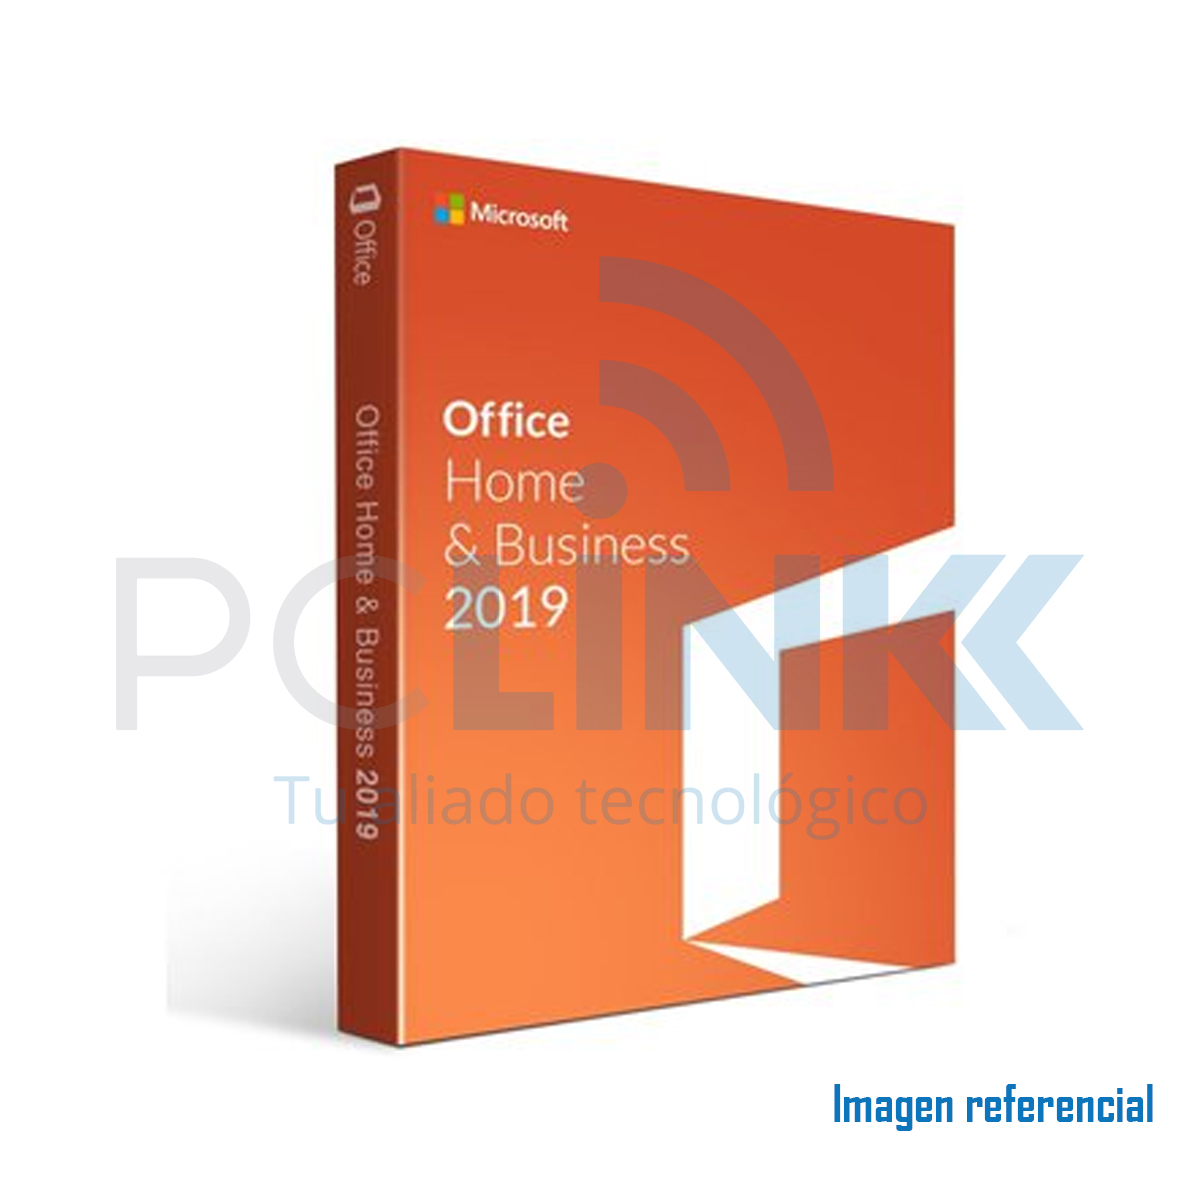 LIC. MS Office Home & Business 2019 ESD TO PRINT PN T5D-03191L